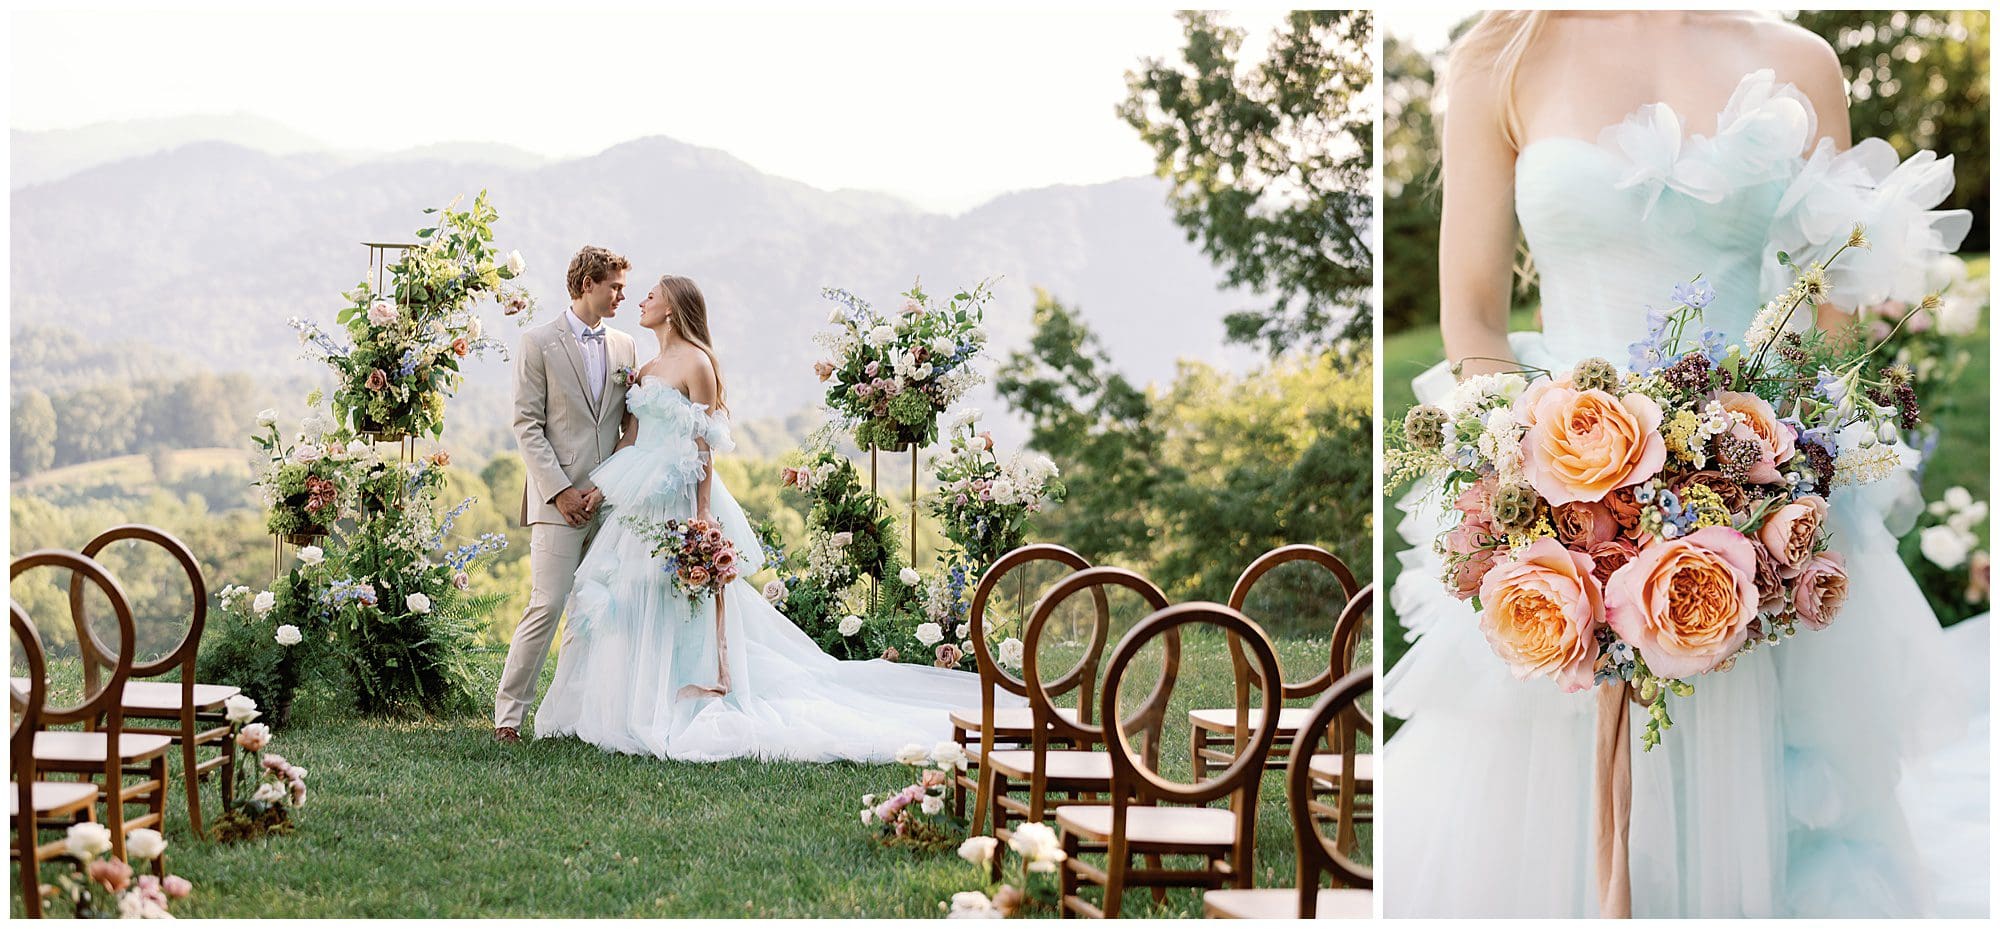 A Parisian-inspired summer wedding at The Ridge, with a bride and groom celebrating their special day surrounded by the majestic mountains.